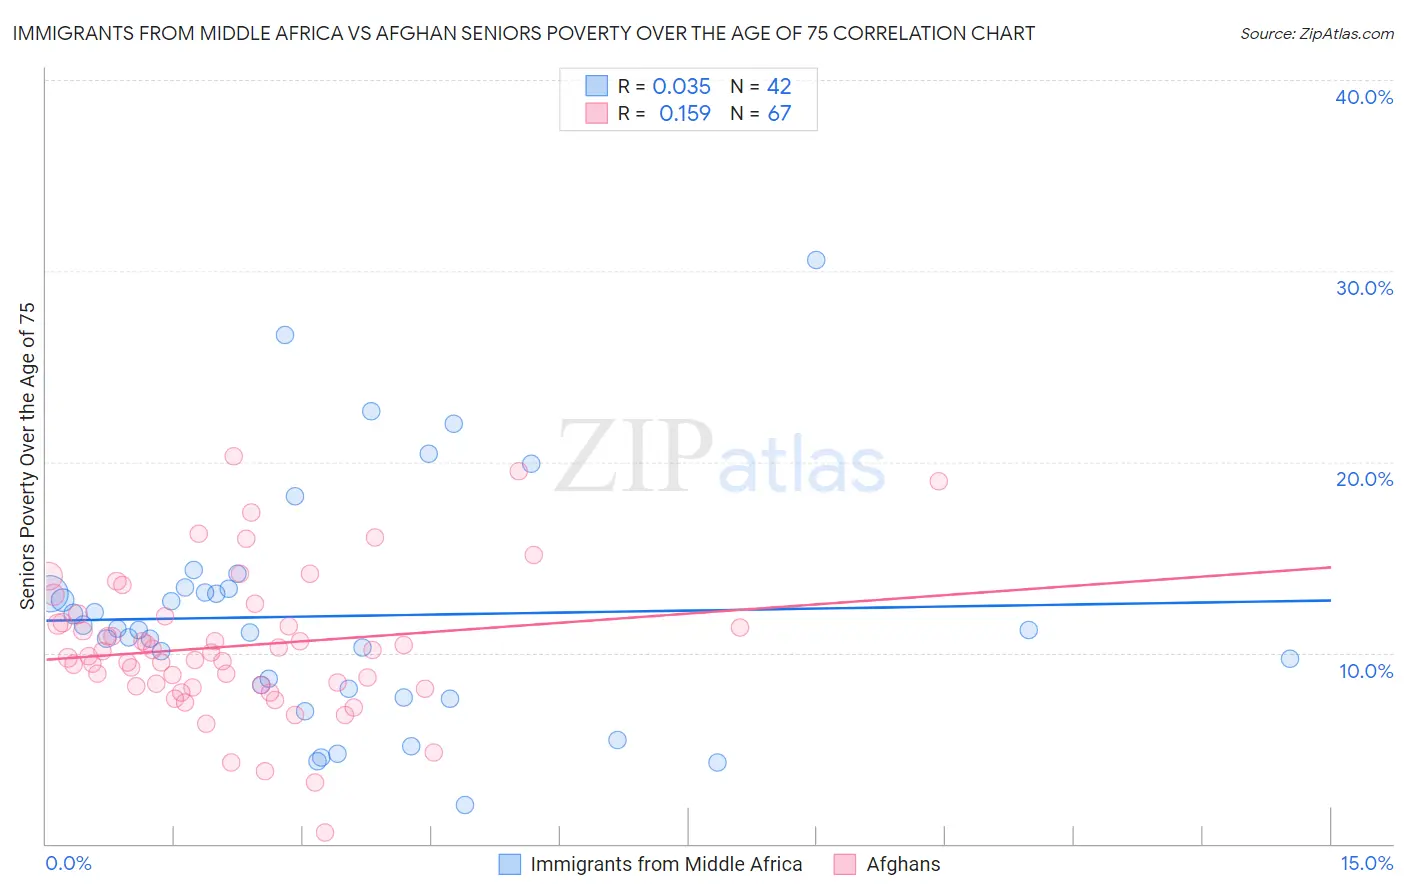 Immigrants from Middle Africa vs Afghan Seniors Poverty Over the Age of 75